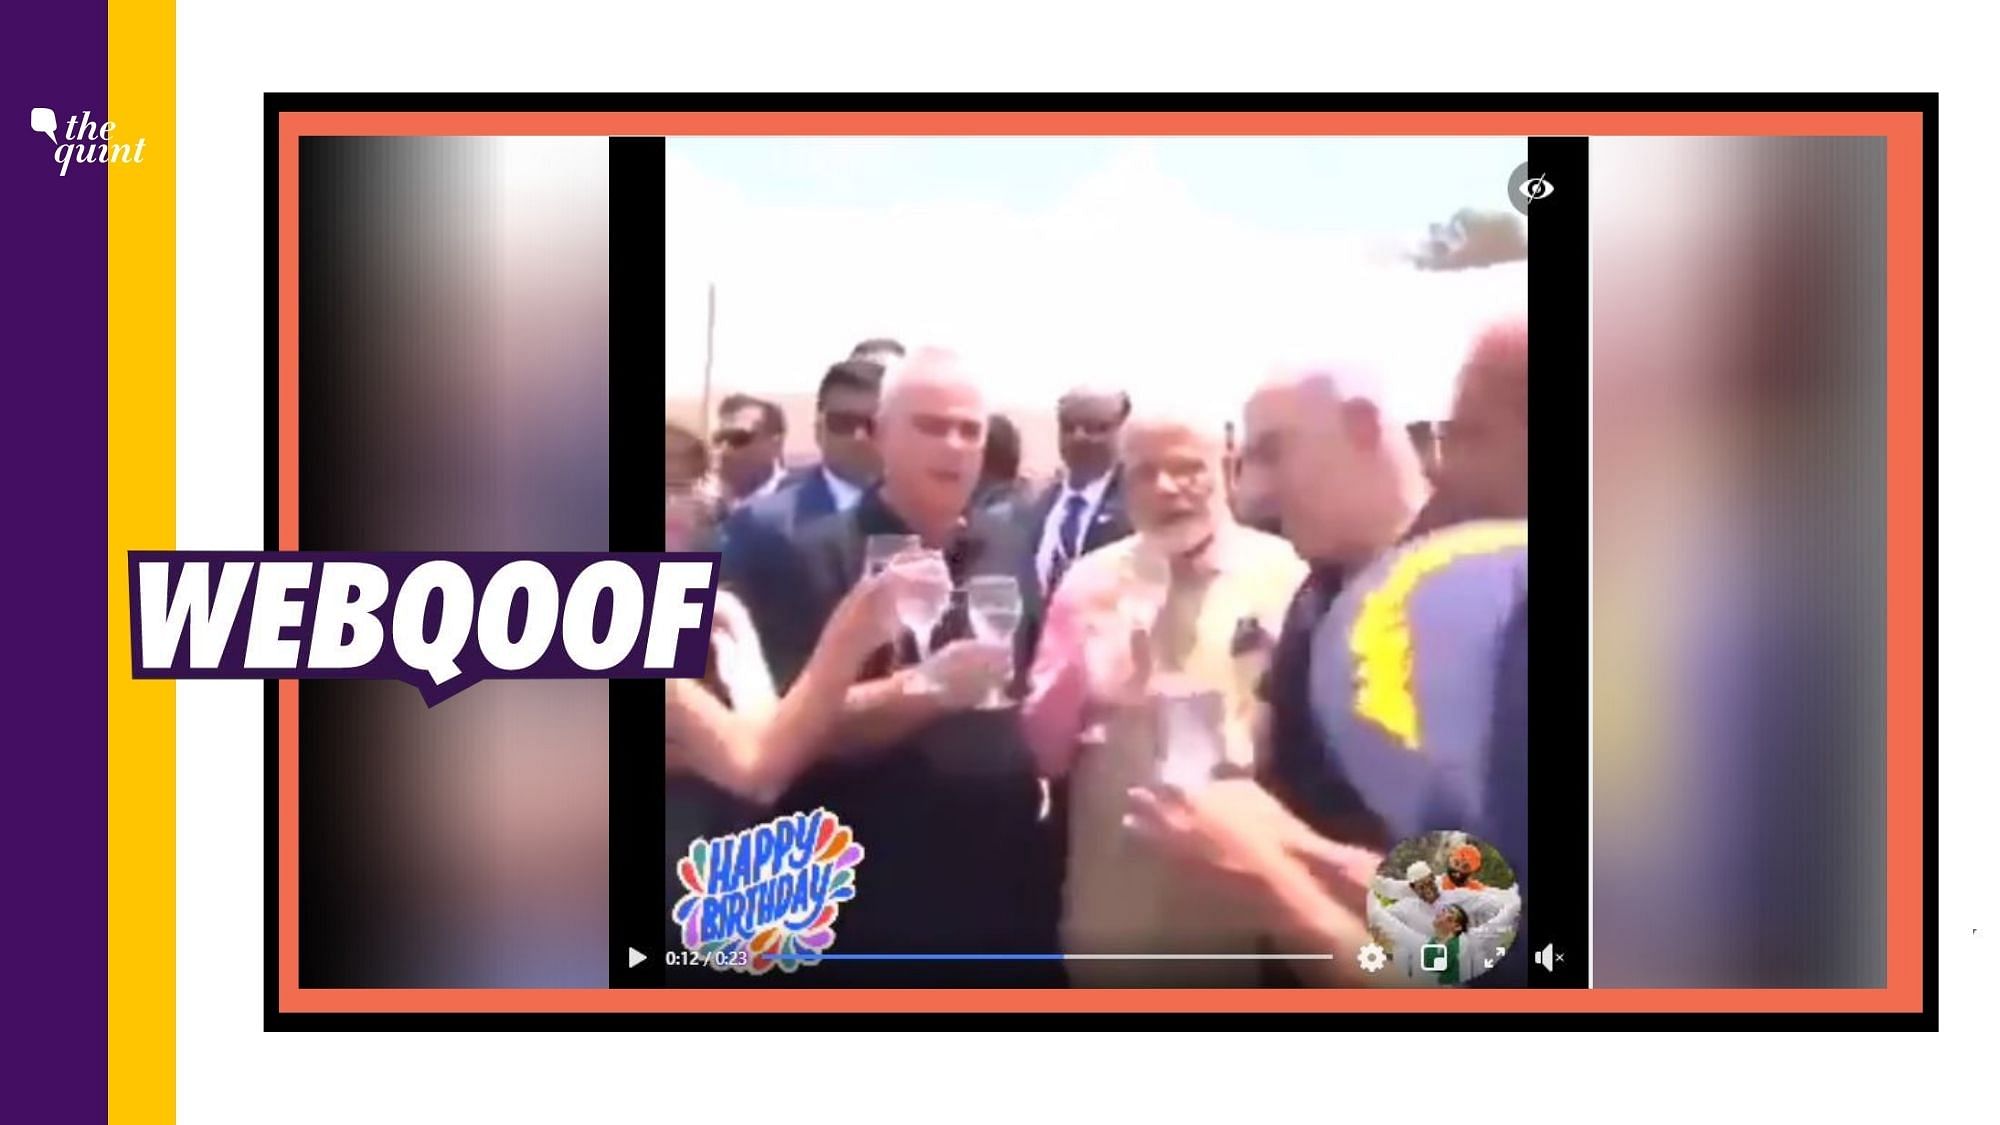 A viral video is being shared with a claim that Prime Minister Narendra Modi celebrated his birthday with top industrialists amid the coronavirus outbreak.